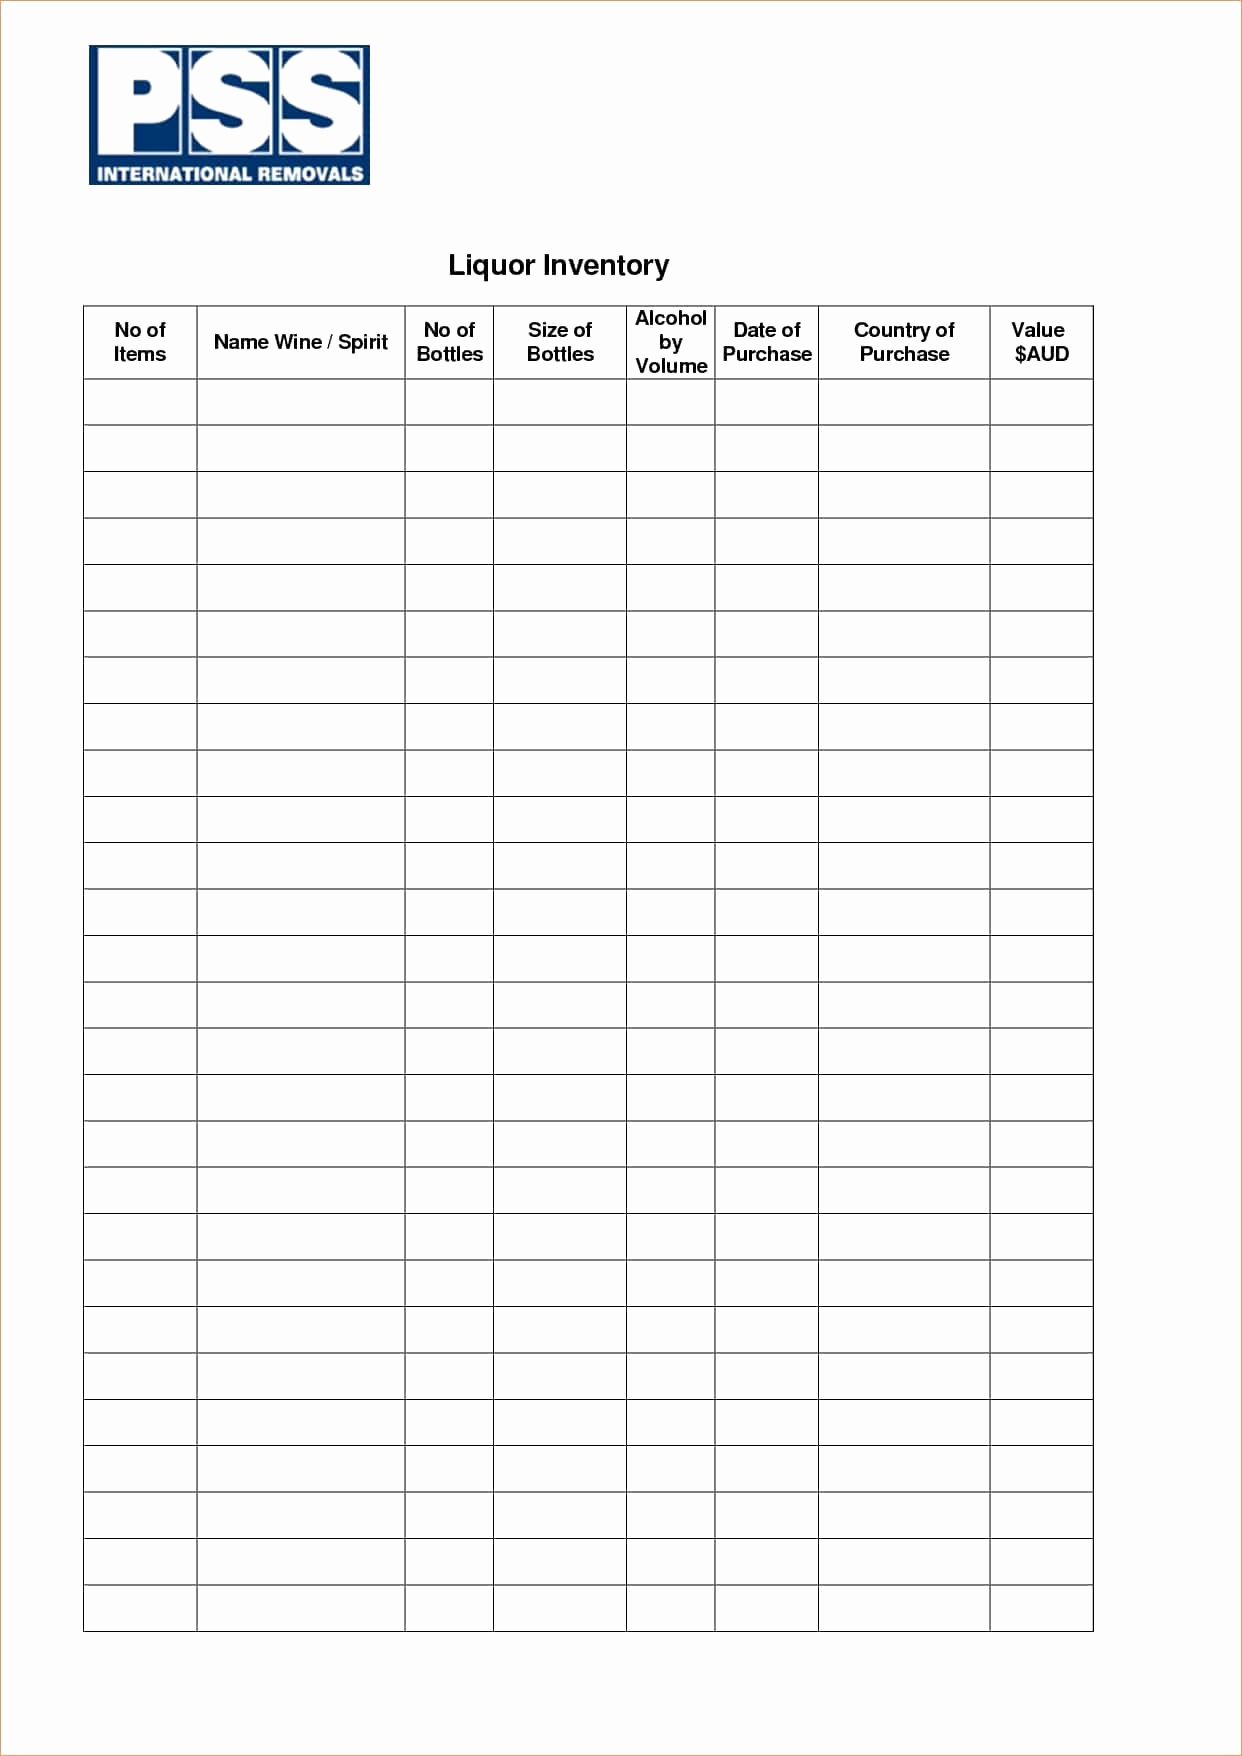 coffee-shop-inventory-spreadsheet-throughout-printable-liquor-inventory